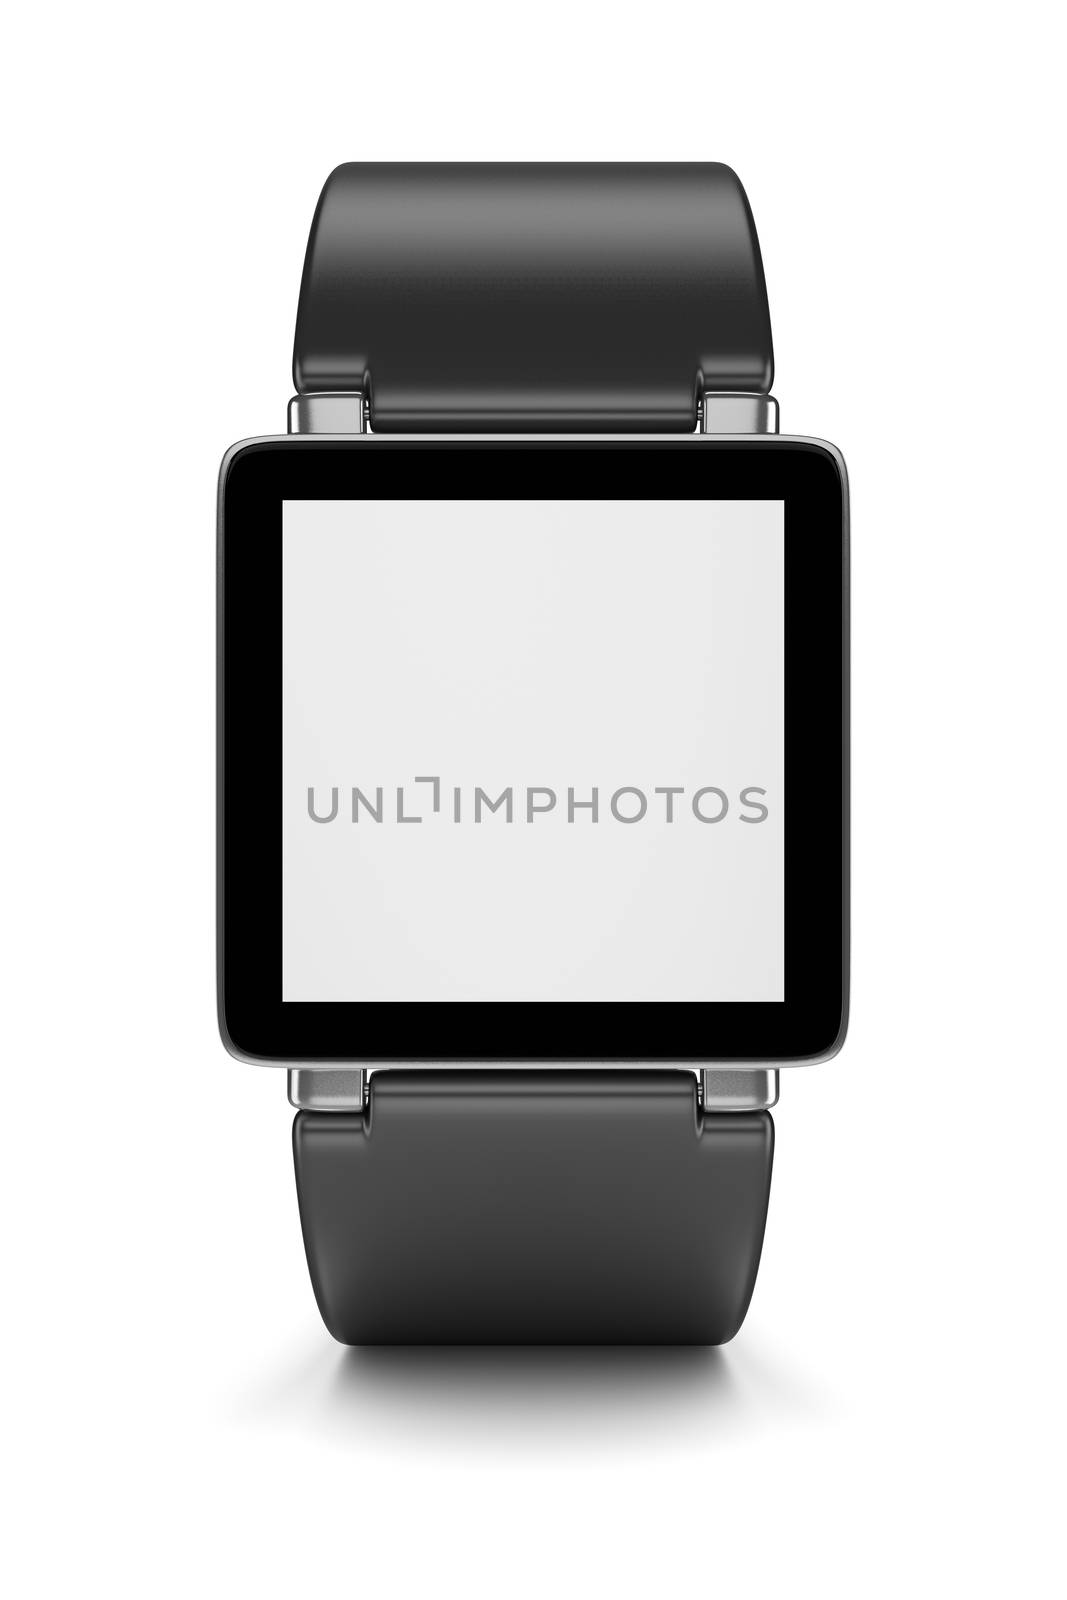 Black Smartwatch with Blank Display on White Background 3D Illustration, Front View